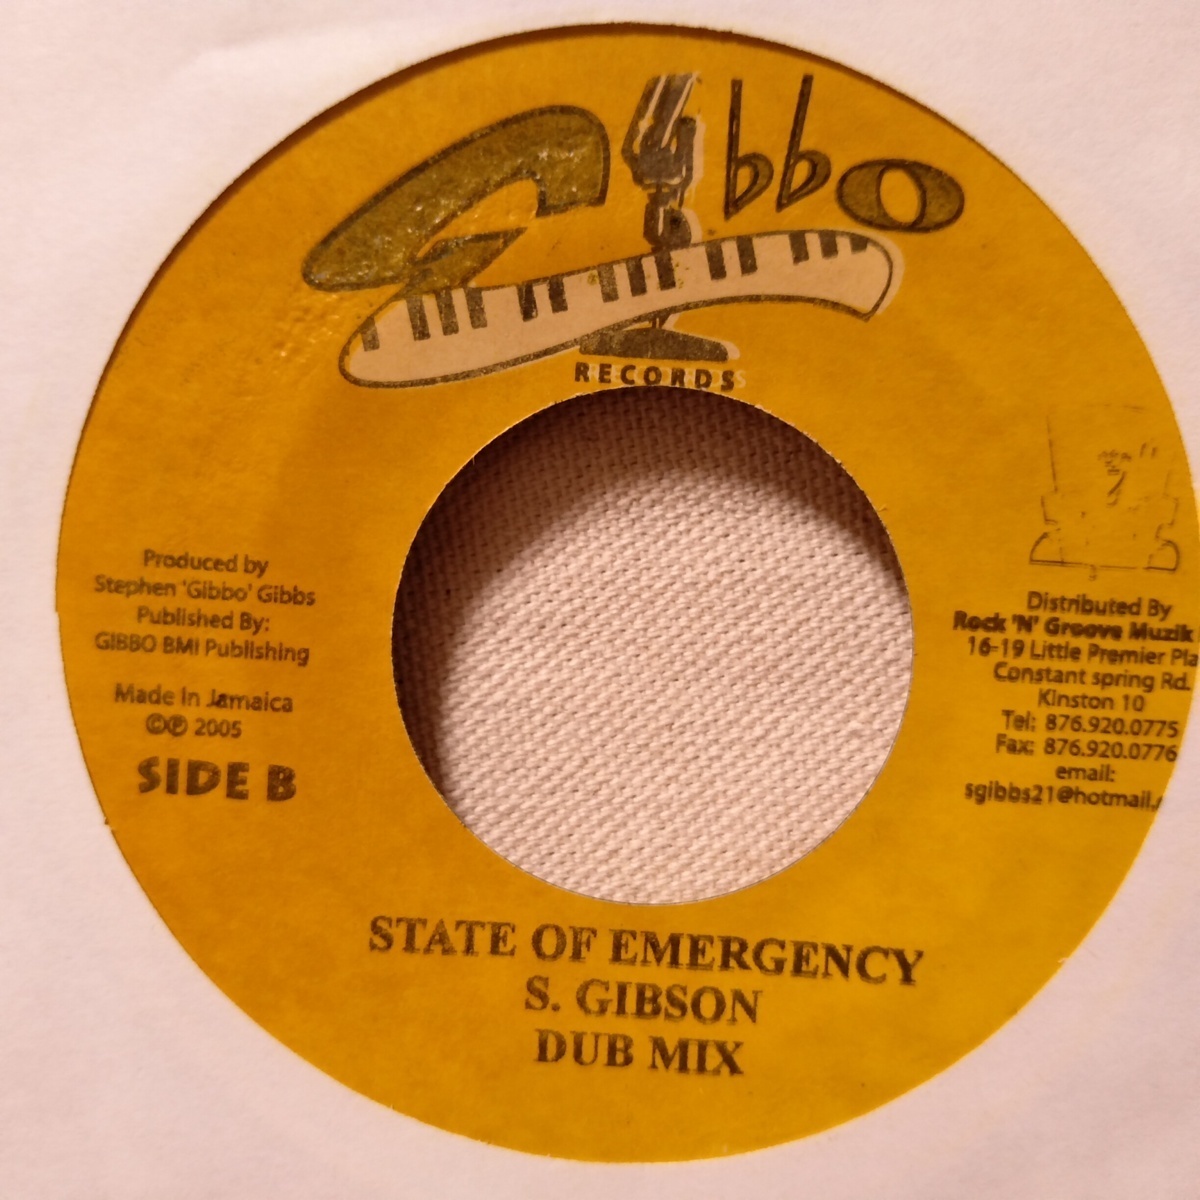 NATTY KING OUTTA ROAD / STATE OF EMERGENCY ★ レゲエ ★7インチレコード[6934EP_画像2